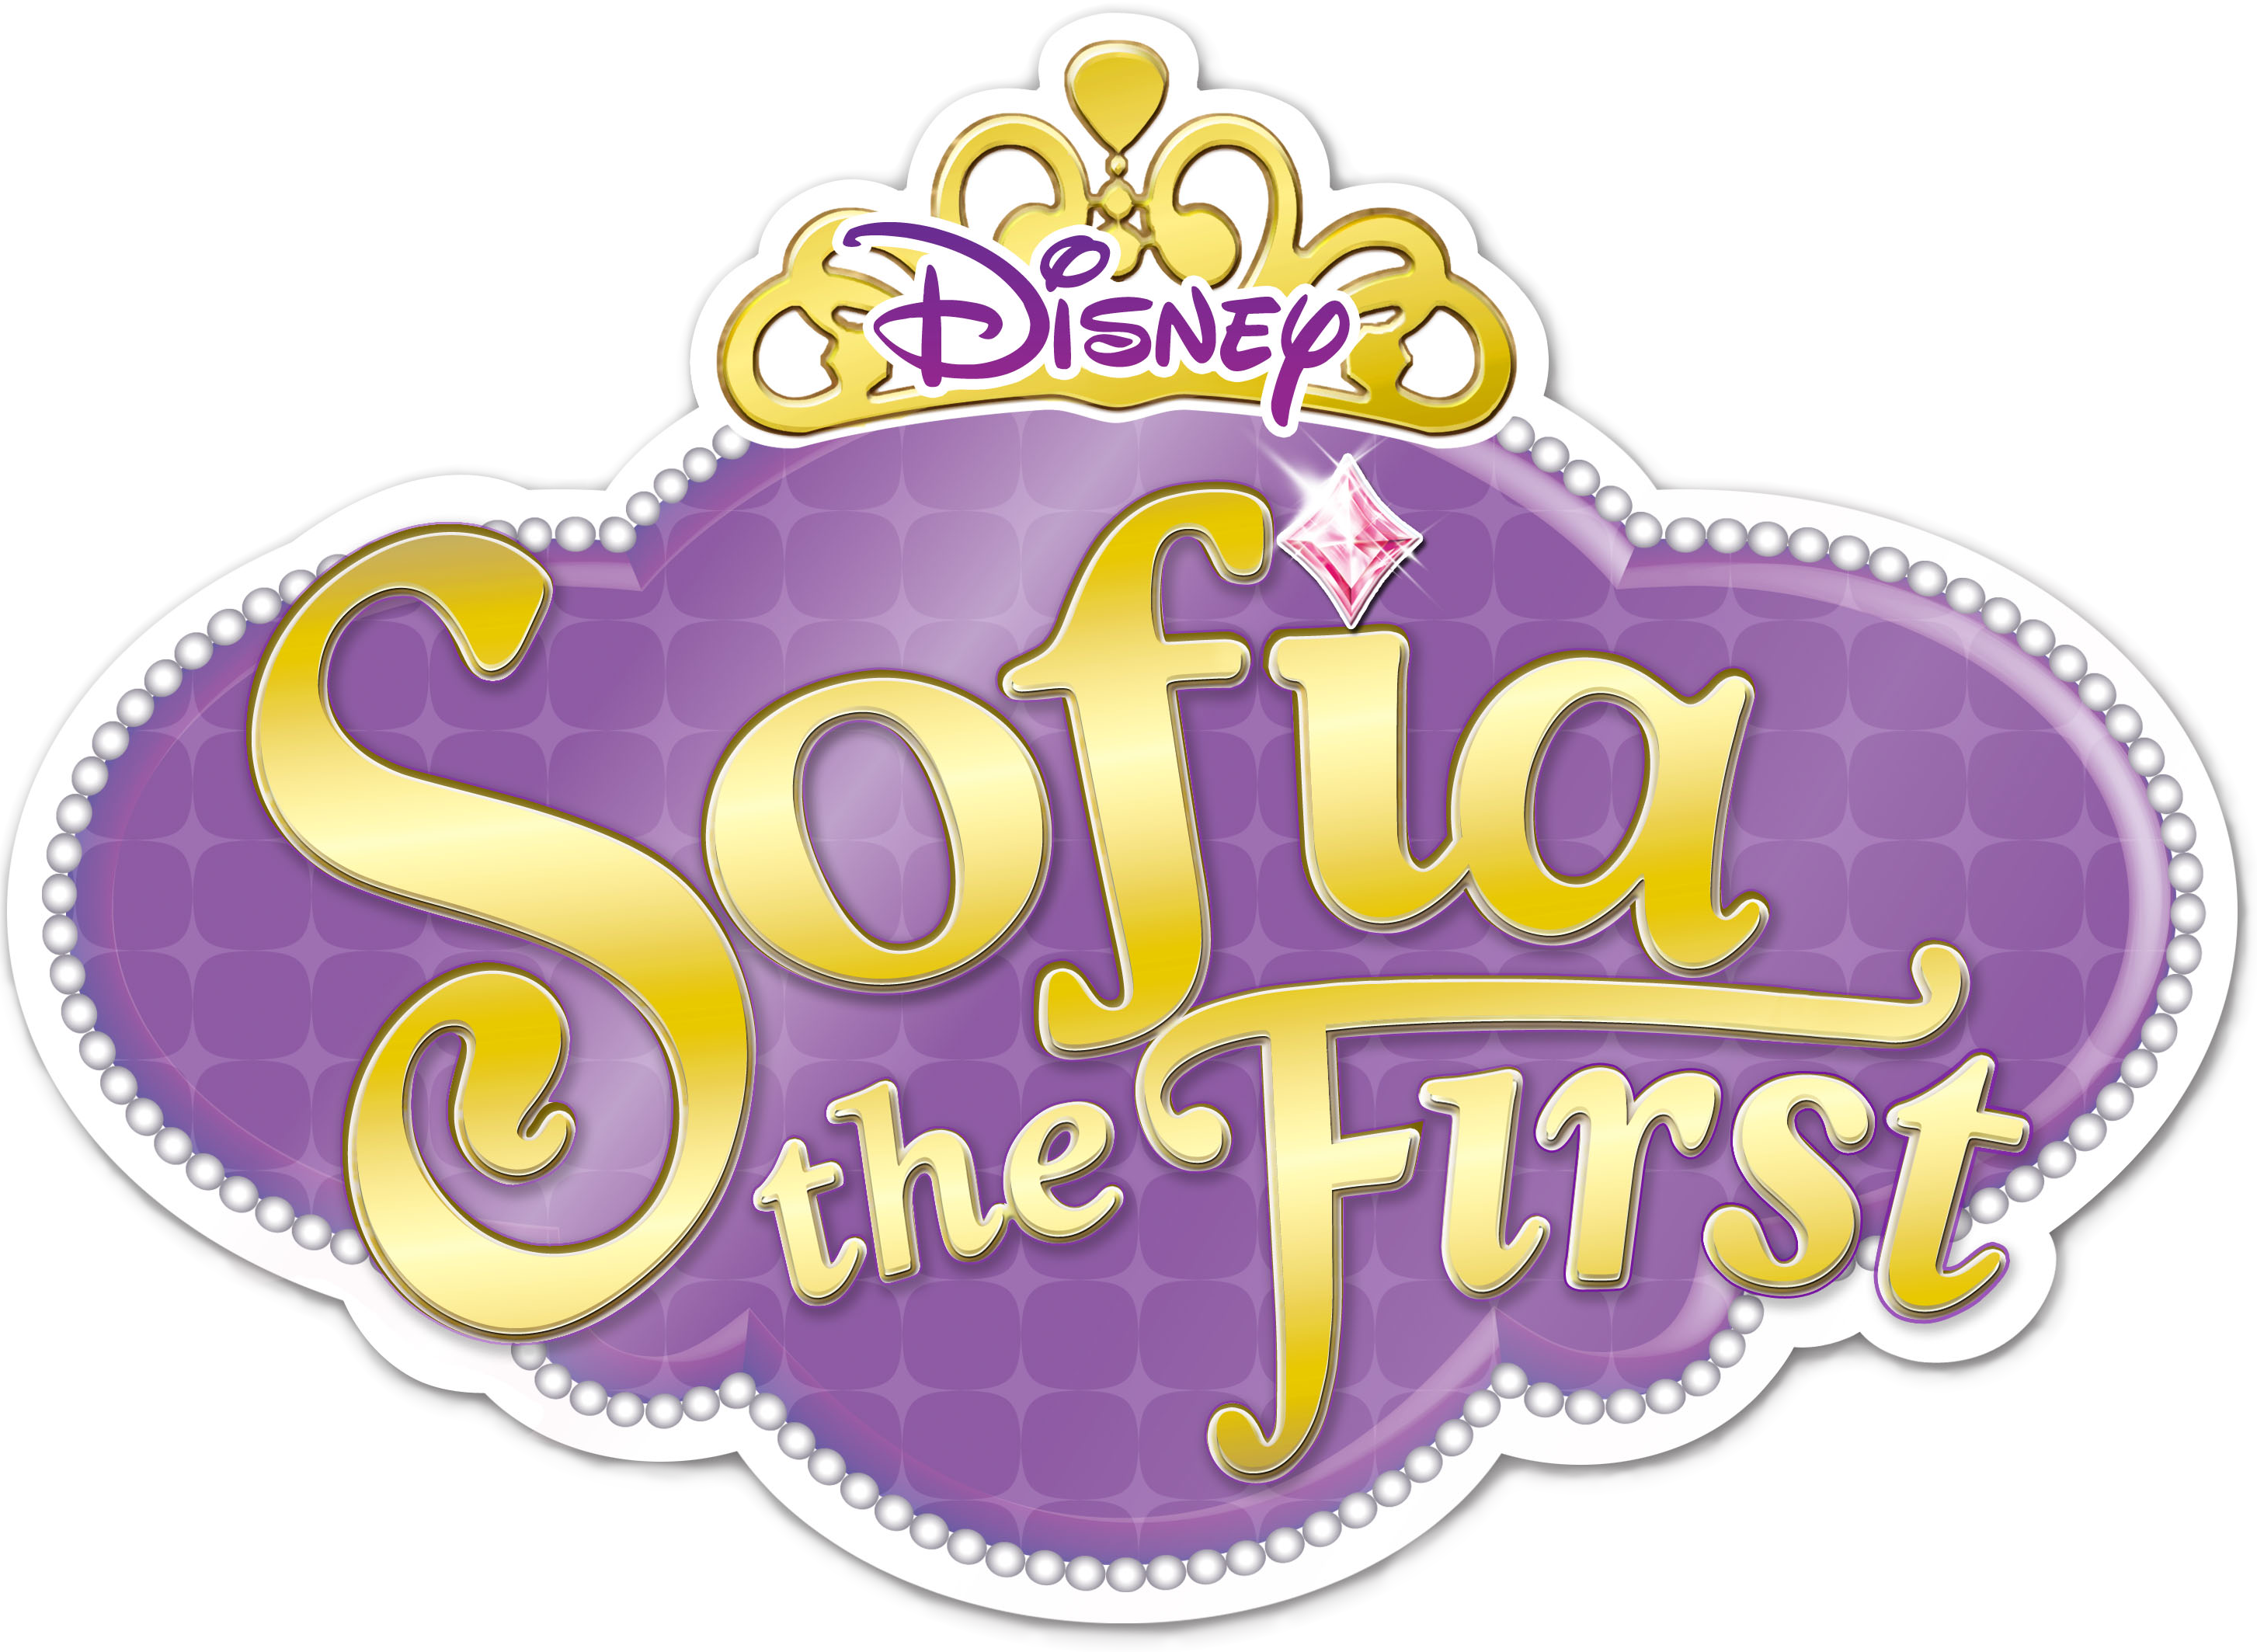 Sofia The First: Once Upon A Princess - Disney+ Hotstar